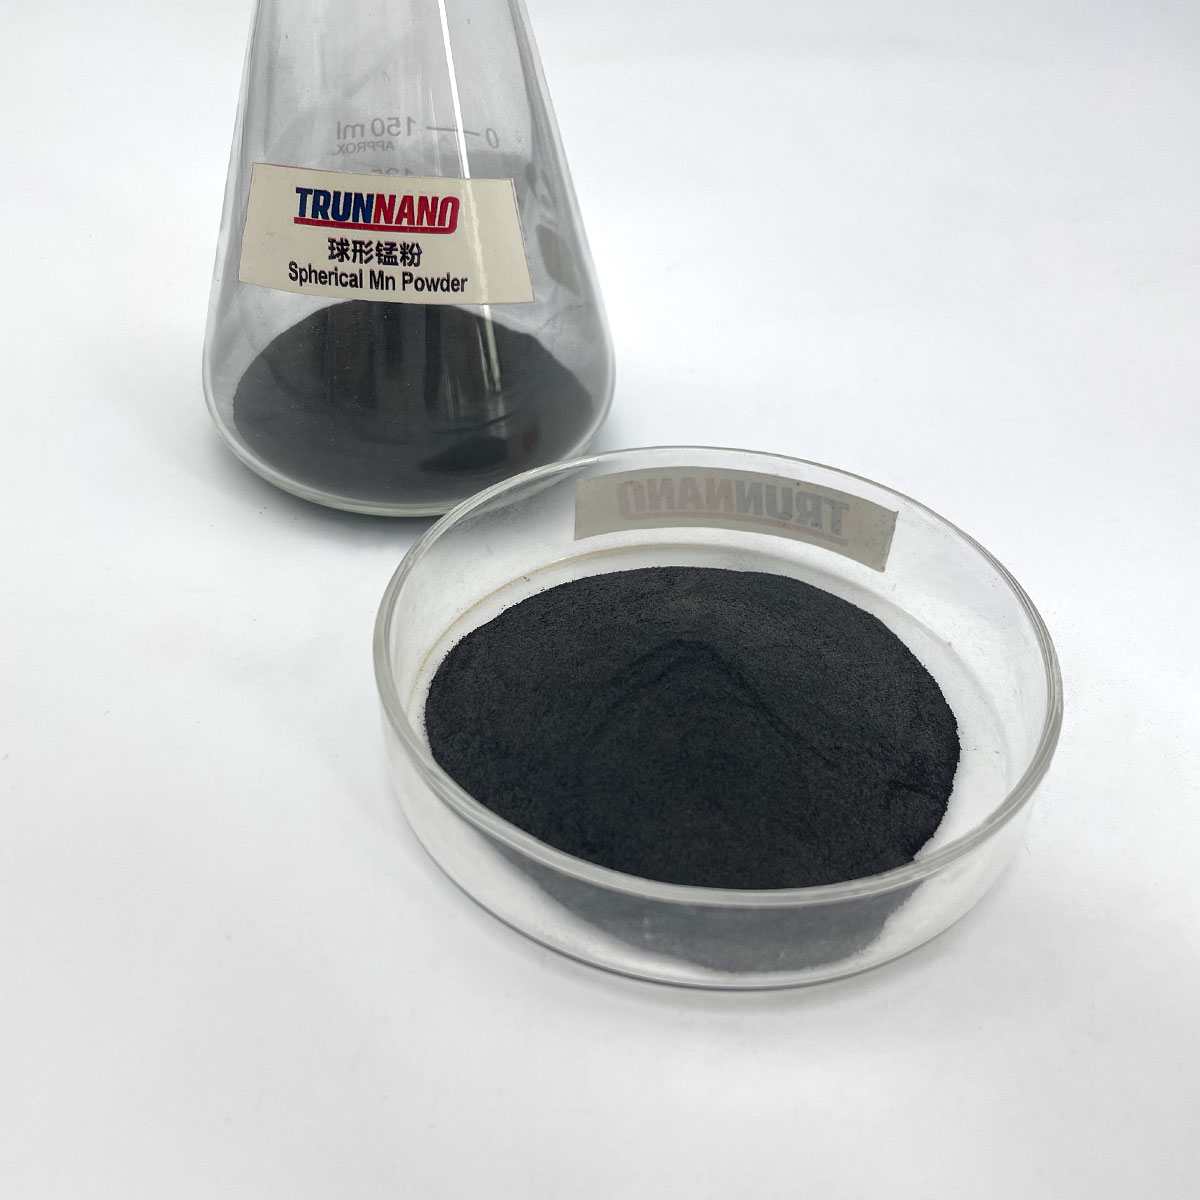 AKD Emulsion/ Wax/ Paper Sizing/ Water resistance/ Cationic/ Chemicals 